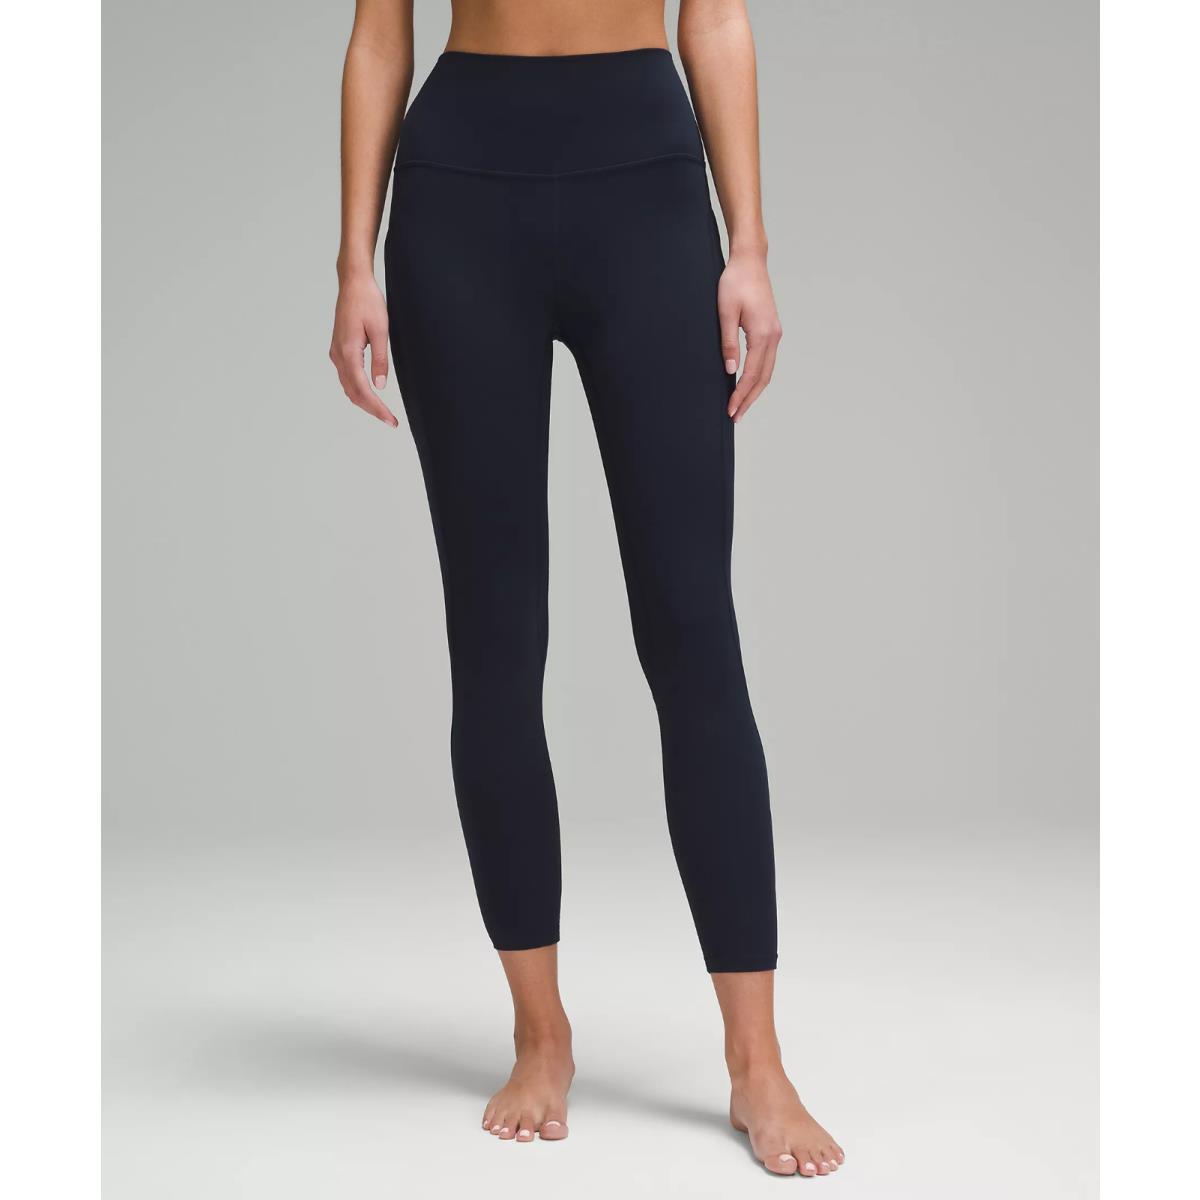 Lululemon Align High Rise Pant with Pockets 25 True Navy Blue Tight Size 6